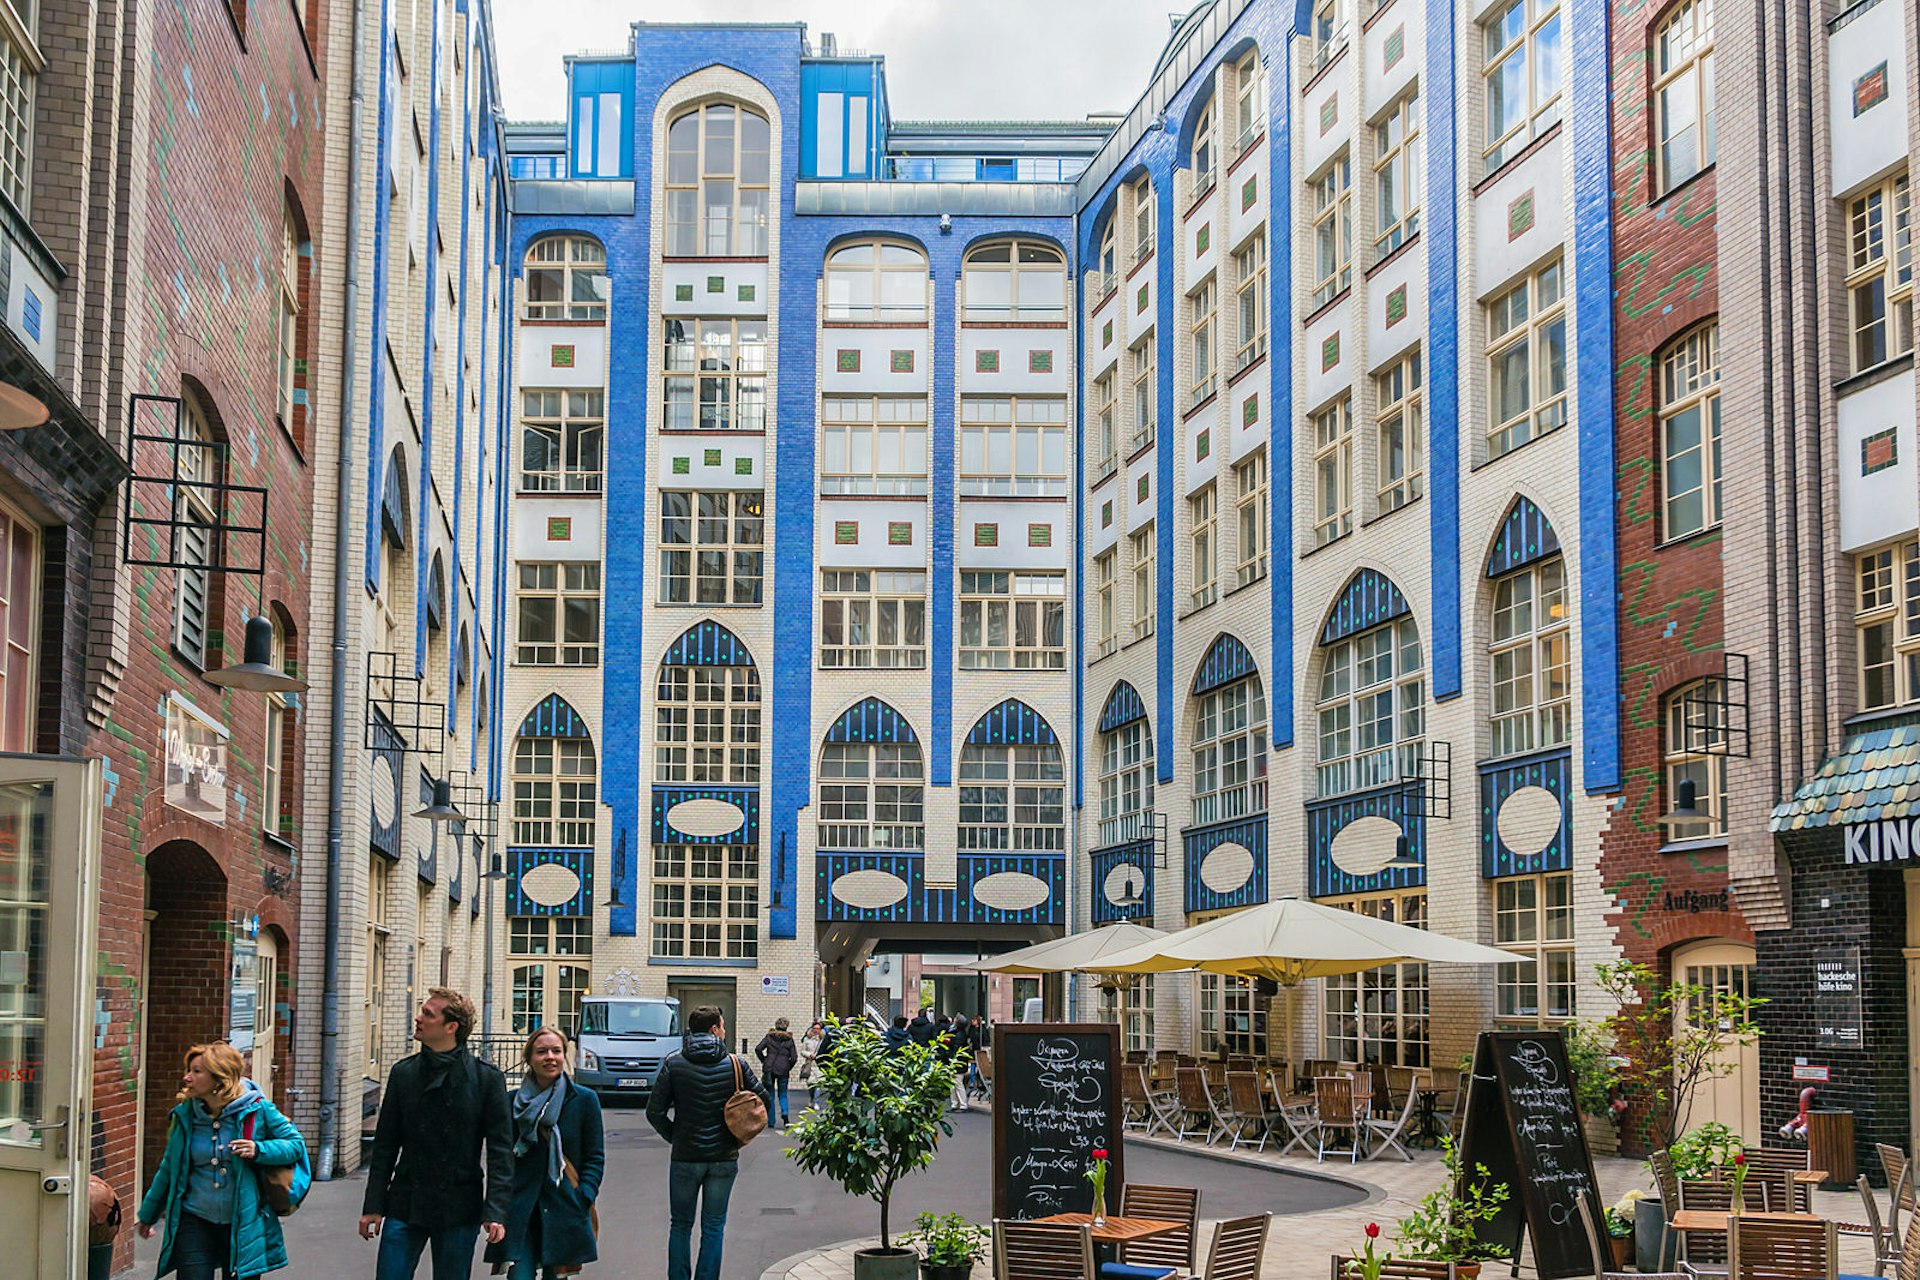 Hackesche Höfe is a series of courtyards joined together to one large complex with multiple uses. The buildings are covered with white and blue tiles.